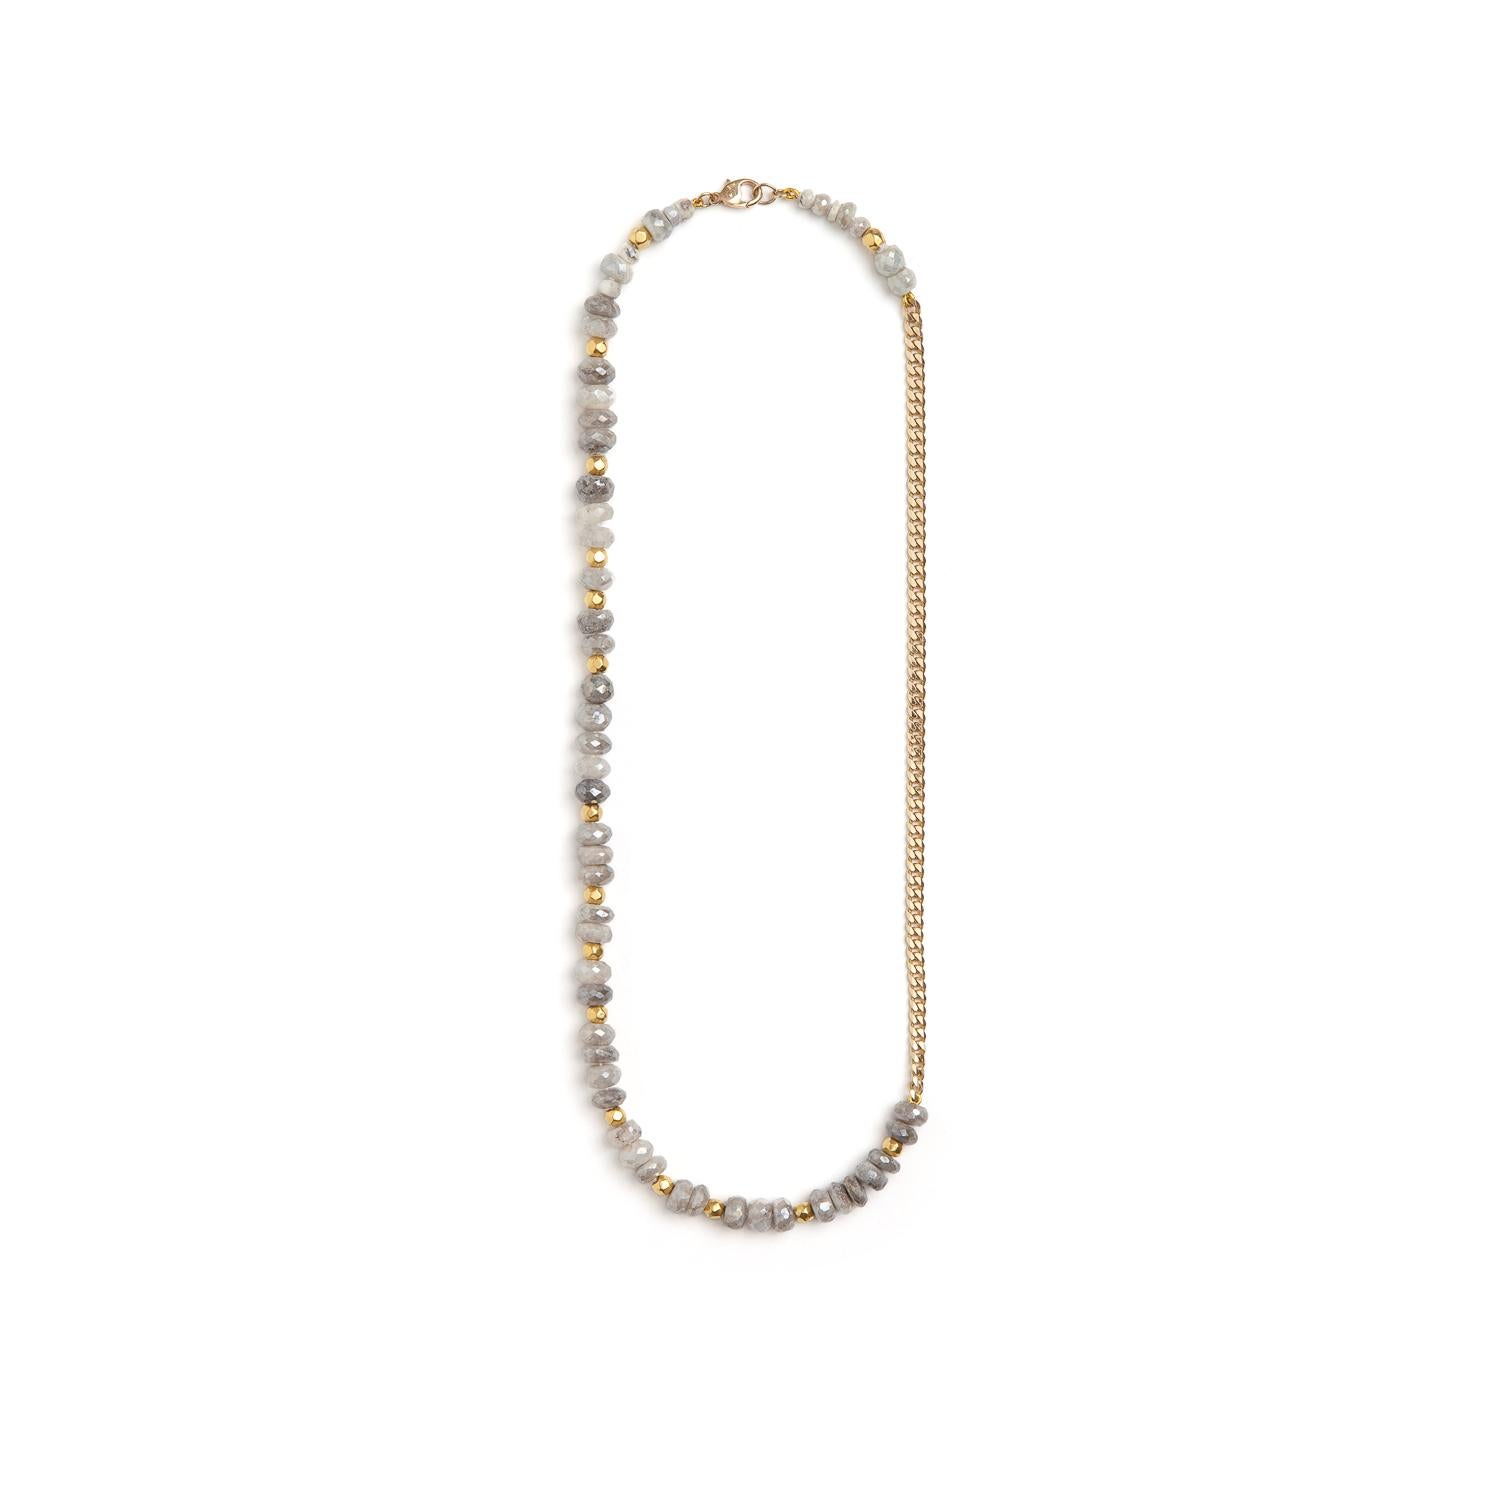 Contemporary Objet-A - Beaded Necklace - White Sapphires and 18k Yellow Gold For Sale